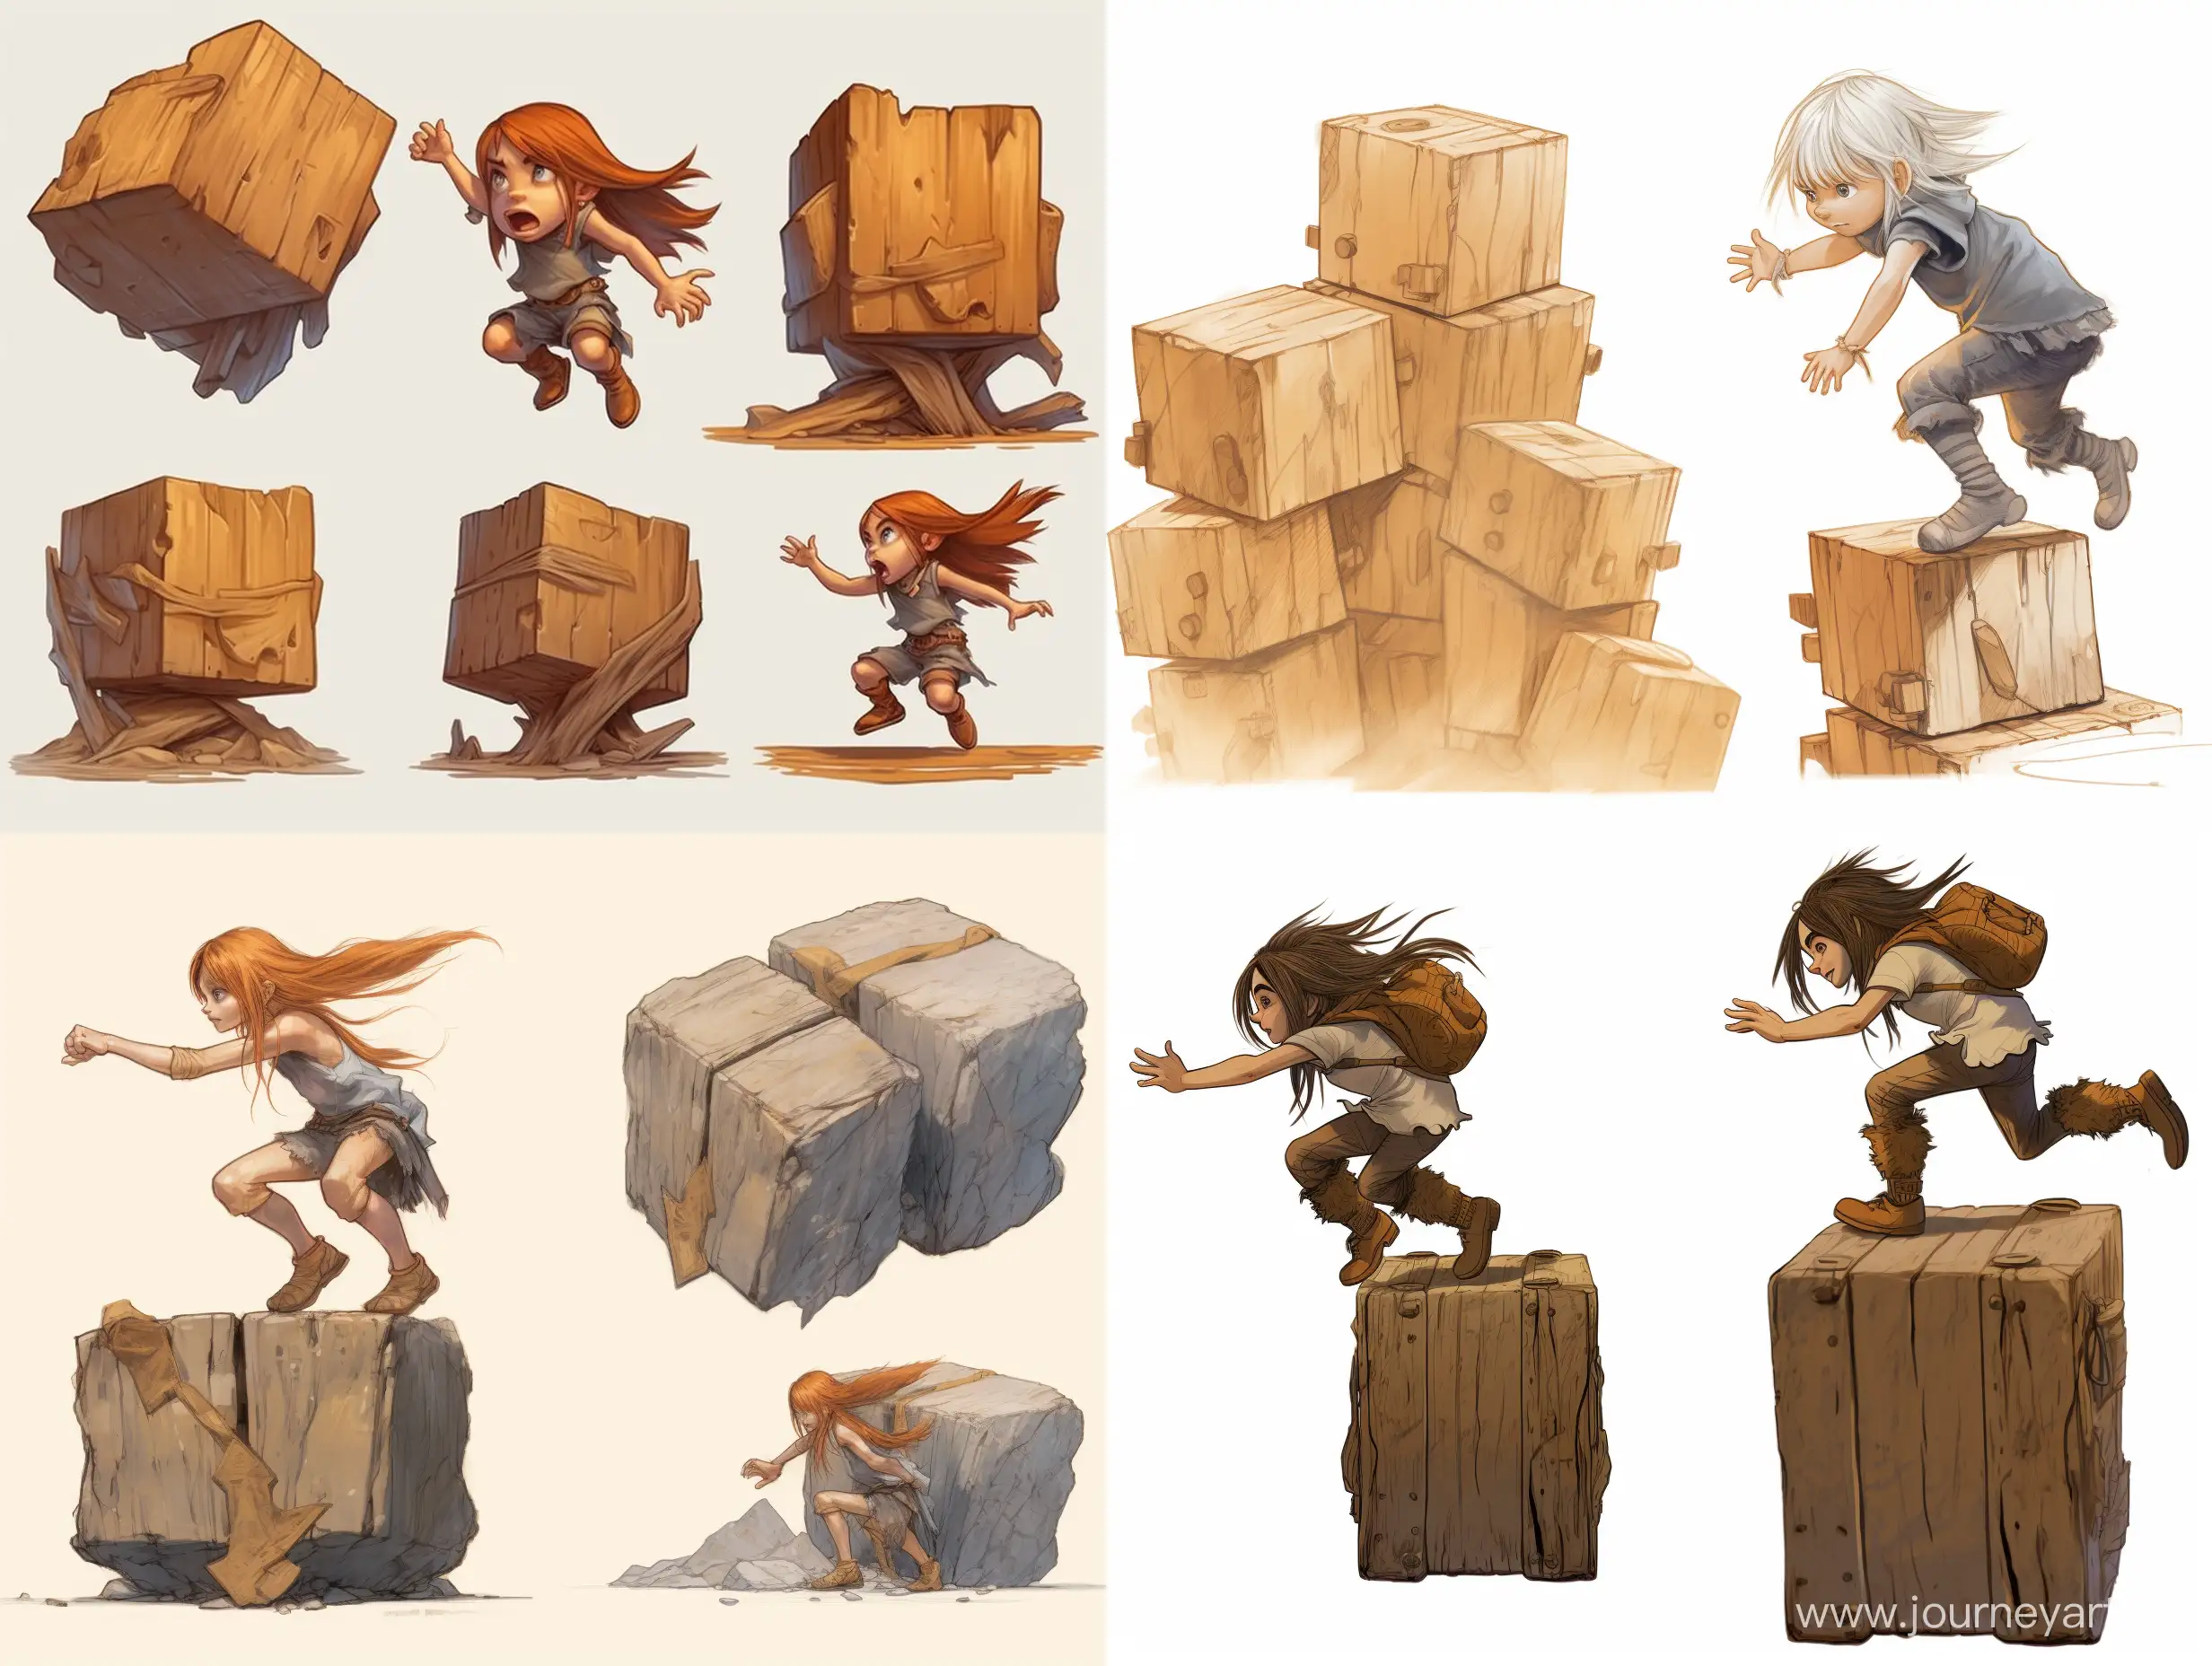 Fantasy-Woodcarving-LifeSize-Troll-Girl-Leaping-on-Wooden-Cube